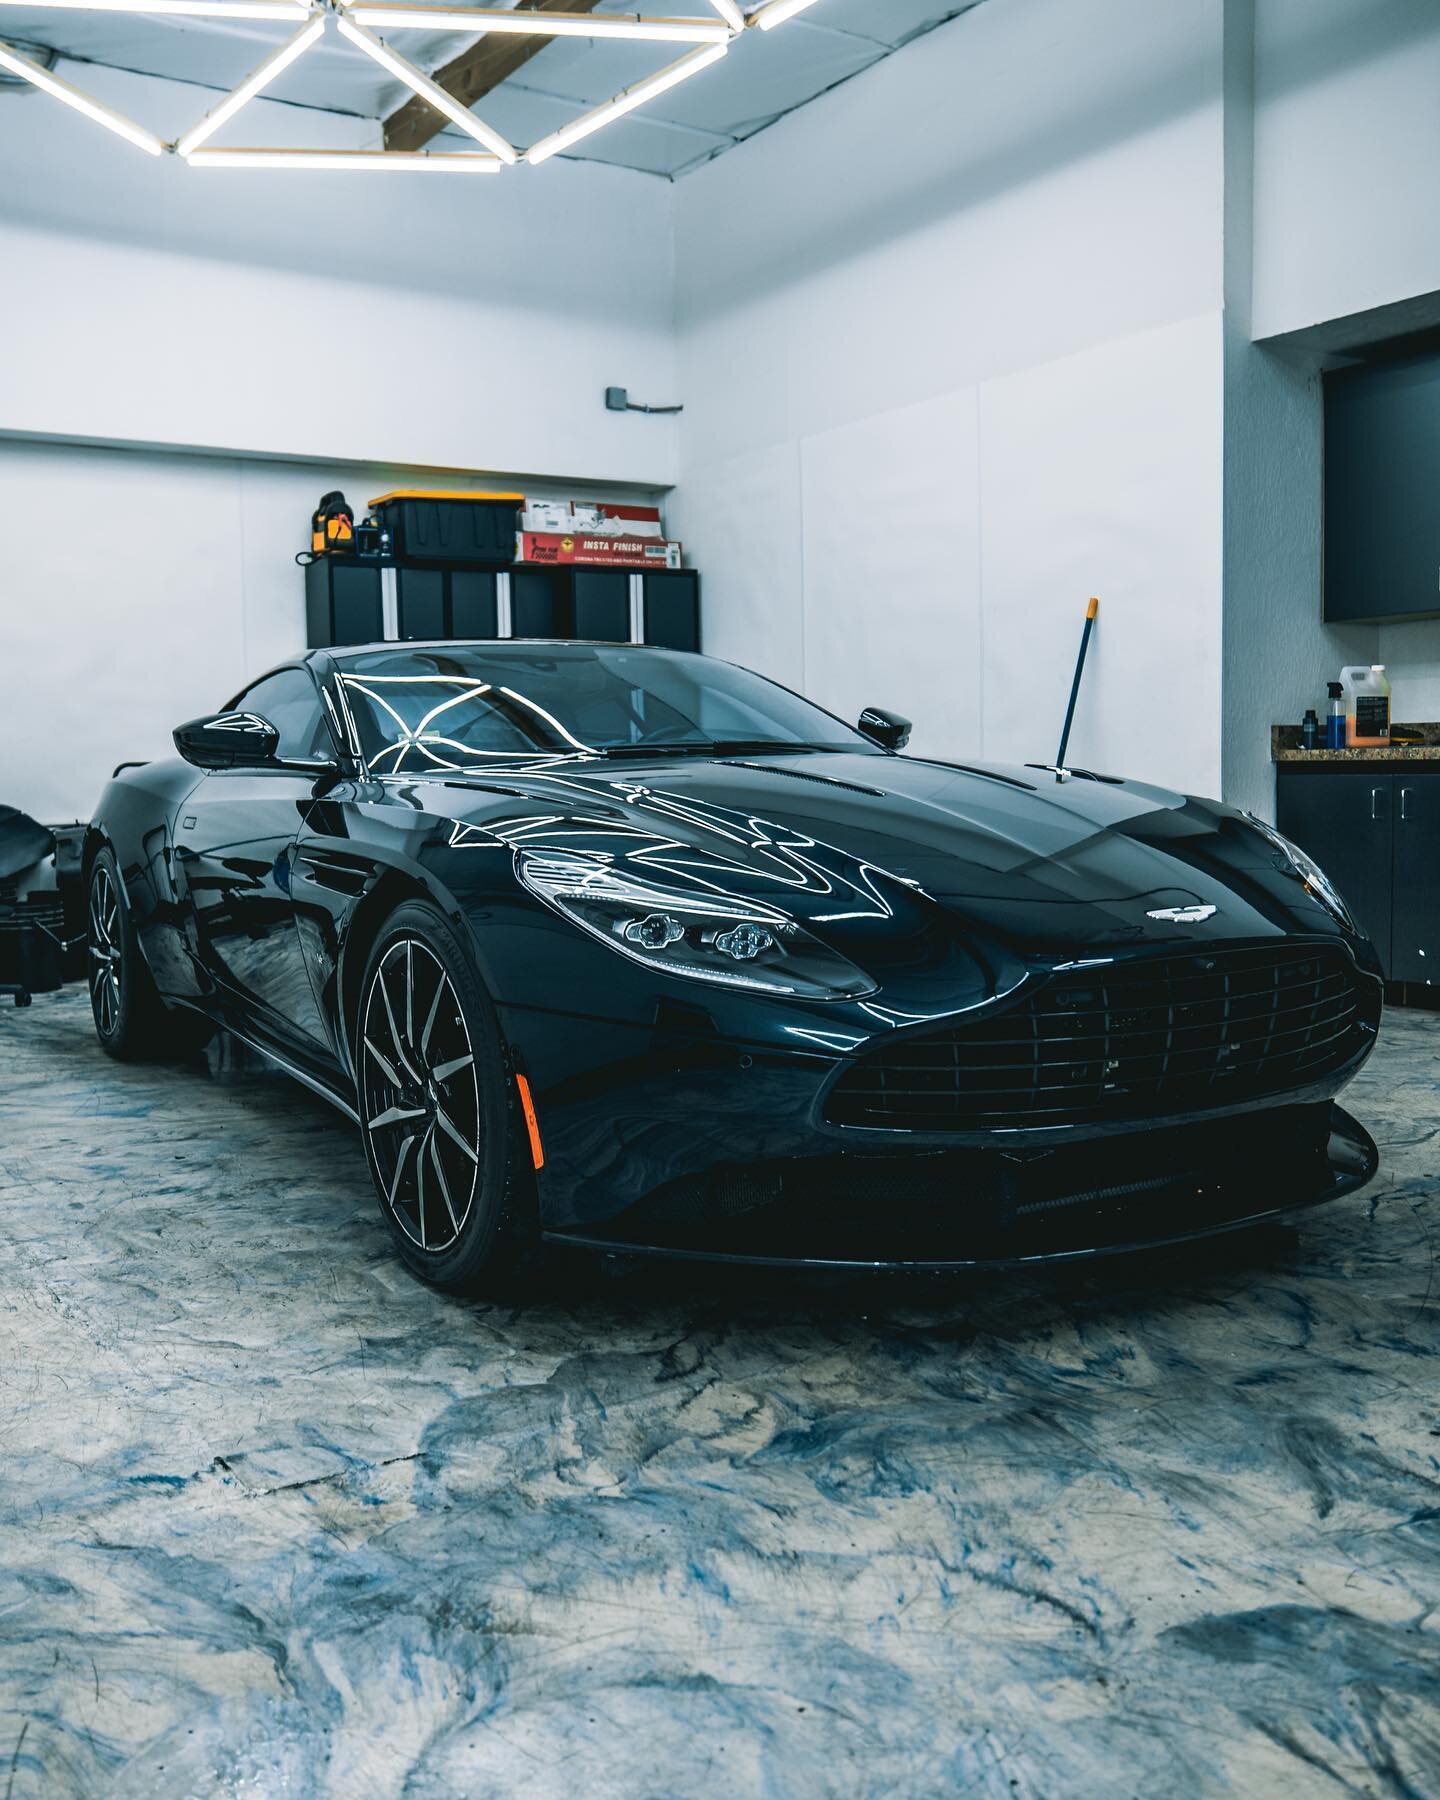 The Aston Martin DB11 is a masterpiece of engineering and design. Our detailing services ensure that every inch of this stunning car shines like new. 🔥💎 #detailinglife #astonmartin

We are an auto detailing team servicing Sacramento since 2019

Con